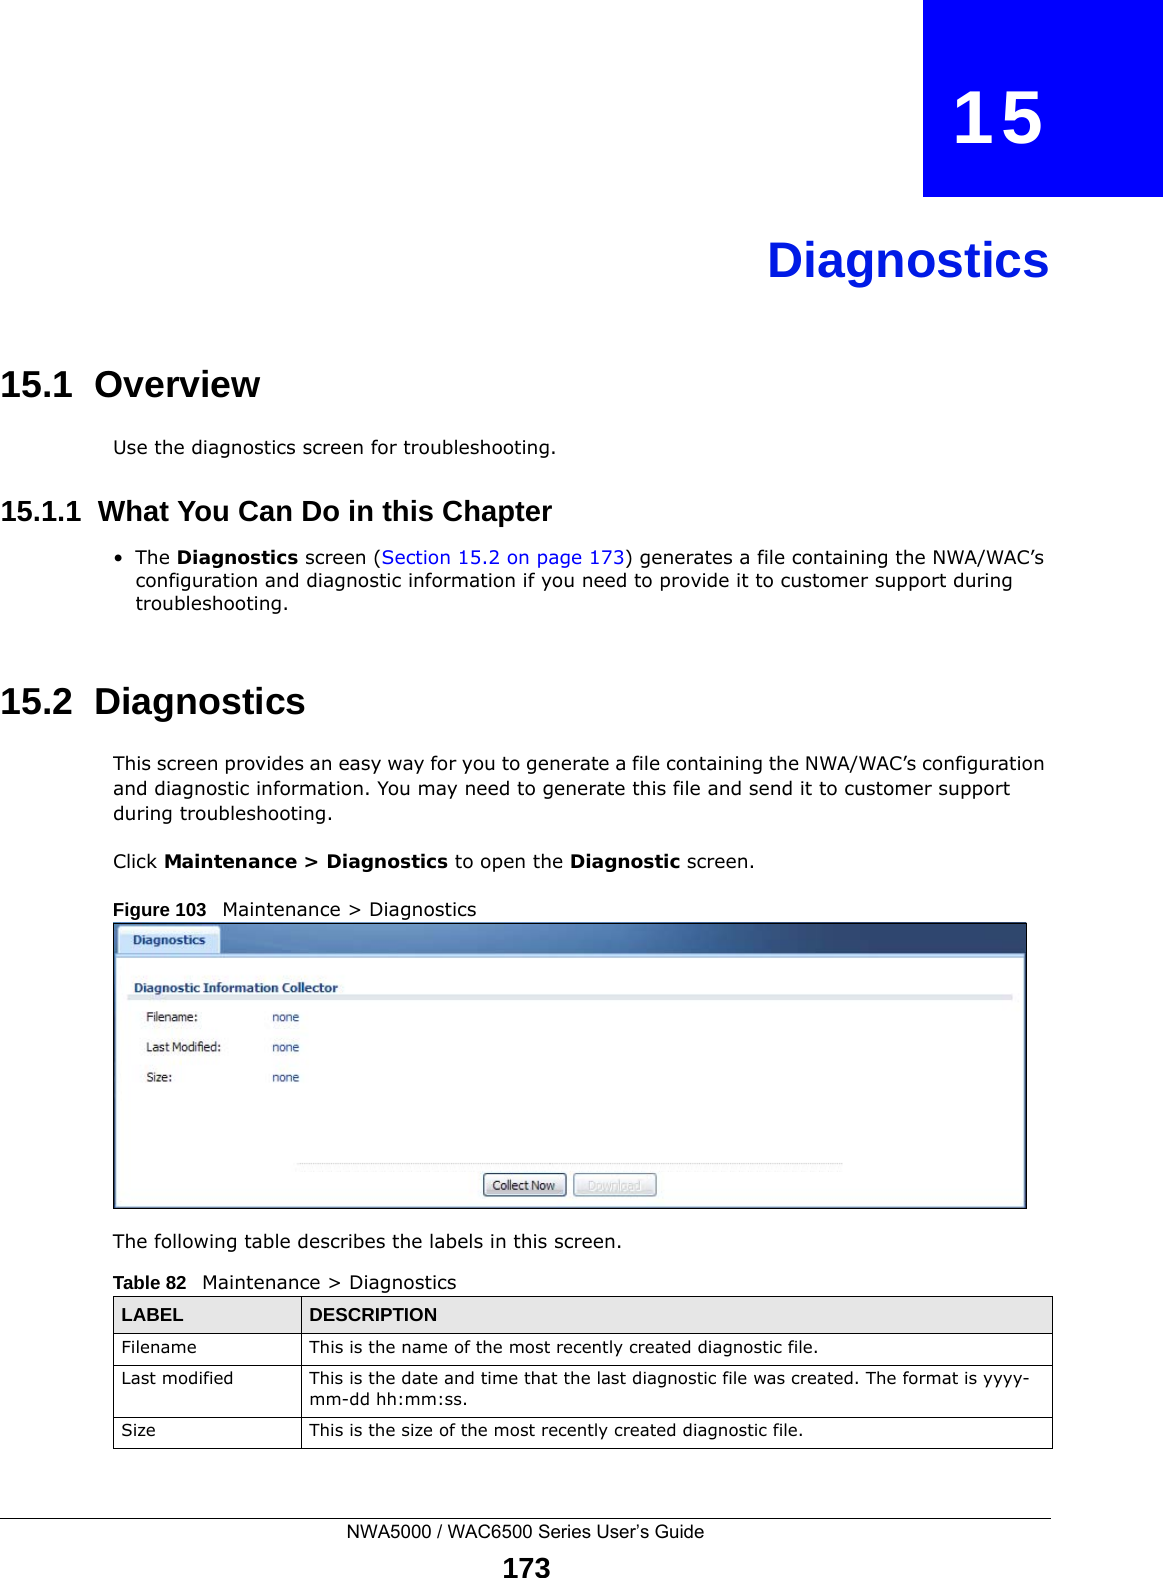 NWA5000 / WAC6500 Series User’s Guide173CHAPTER   15Diagnostics15.1  OverviewUse the diagnostics screen for troubleshooting. 15.1.1  What You Can Do in this Chapter•The Diagnostics screen (Section 15.2 on page 173) generates a file containing the NWA/WAC’s configuration and diagnostic information if you need to provide it to customer support during troubleshooting.15.2  Diagnostics This screen provides an easy way for you to generate a file containing the NWA/WAC’s configuration and diagnostic information. You may need to generate this file and send it to customer support during troubleshooting.Click Maintenance &gt; Diagnostics to open the Diagnostic screen. Figure 103   Maintenance &gt; Diagnostics  The following table describes the labels in this screen.  Table 82   Maintenance &gt; DiagnosticsLABEL DESCRIPTIONFilename This is the name of the most recently created diagnostic file.Last modified This is the date and time that the last diagnostic file was created. The format is yyyy-mm-dd hh:mm:ss.Size This is the size of the most recently created diagnostic file.